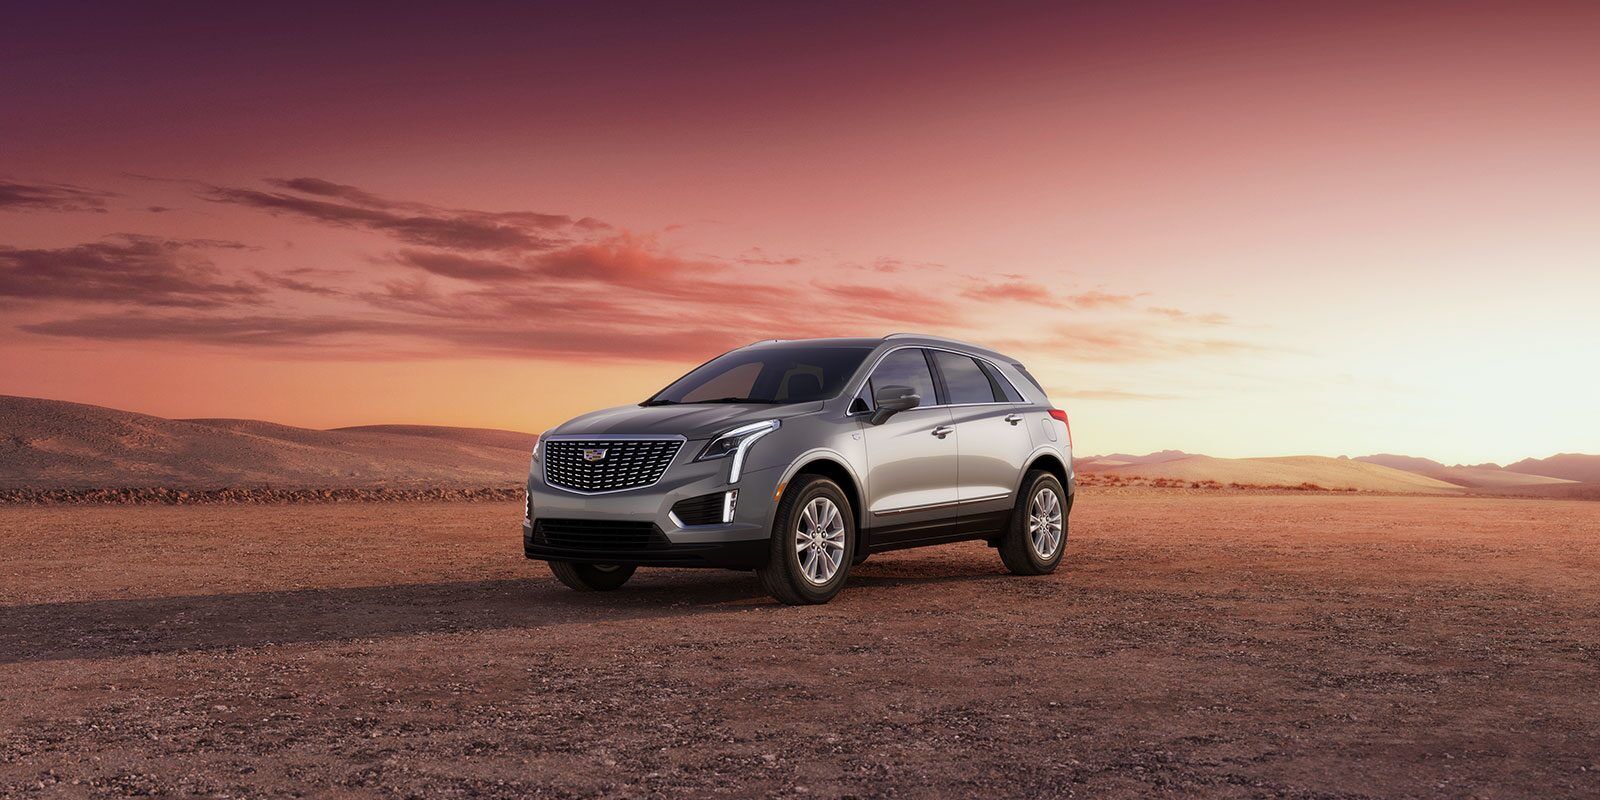 Front 3/4 view of 2023 Cadillac XT5 parked on deserted land.